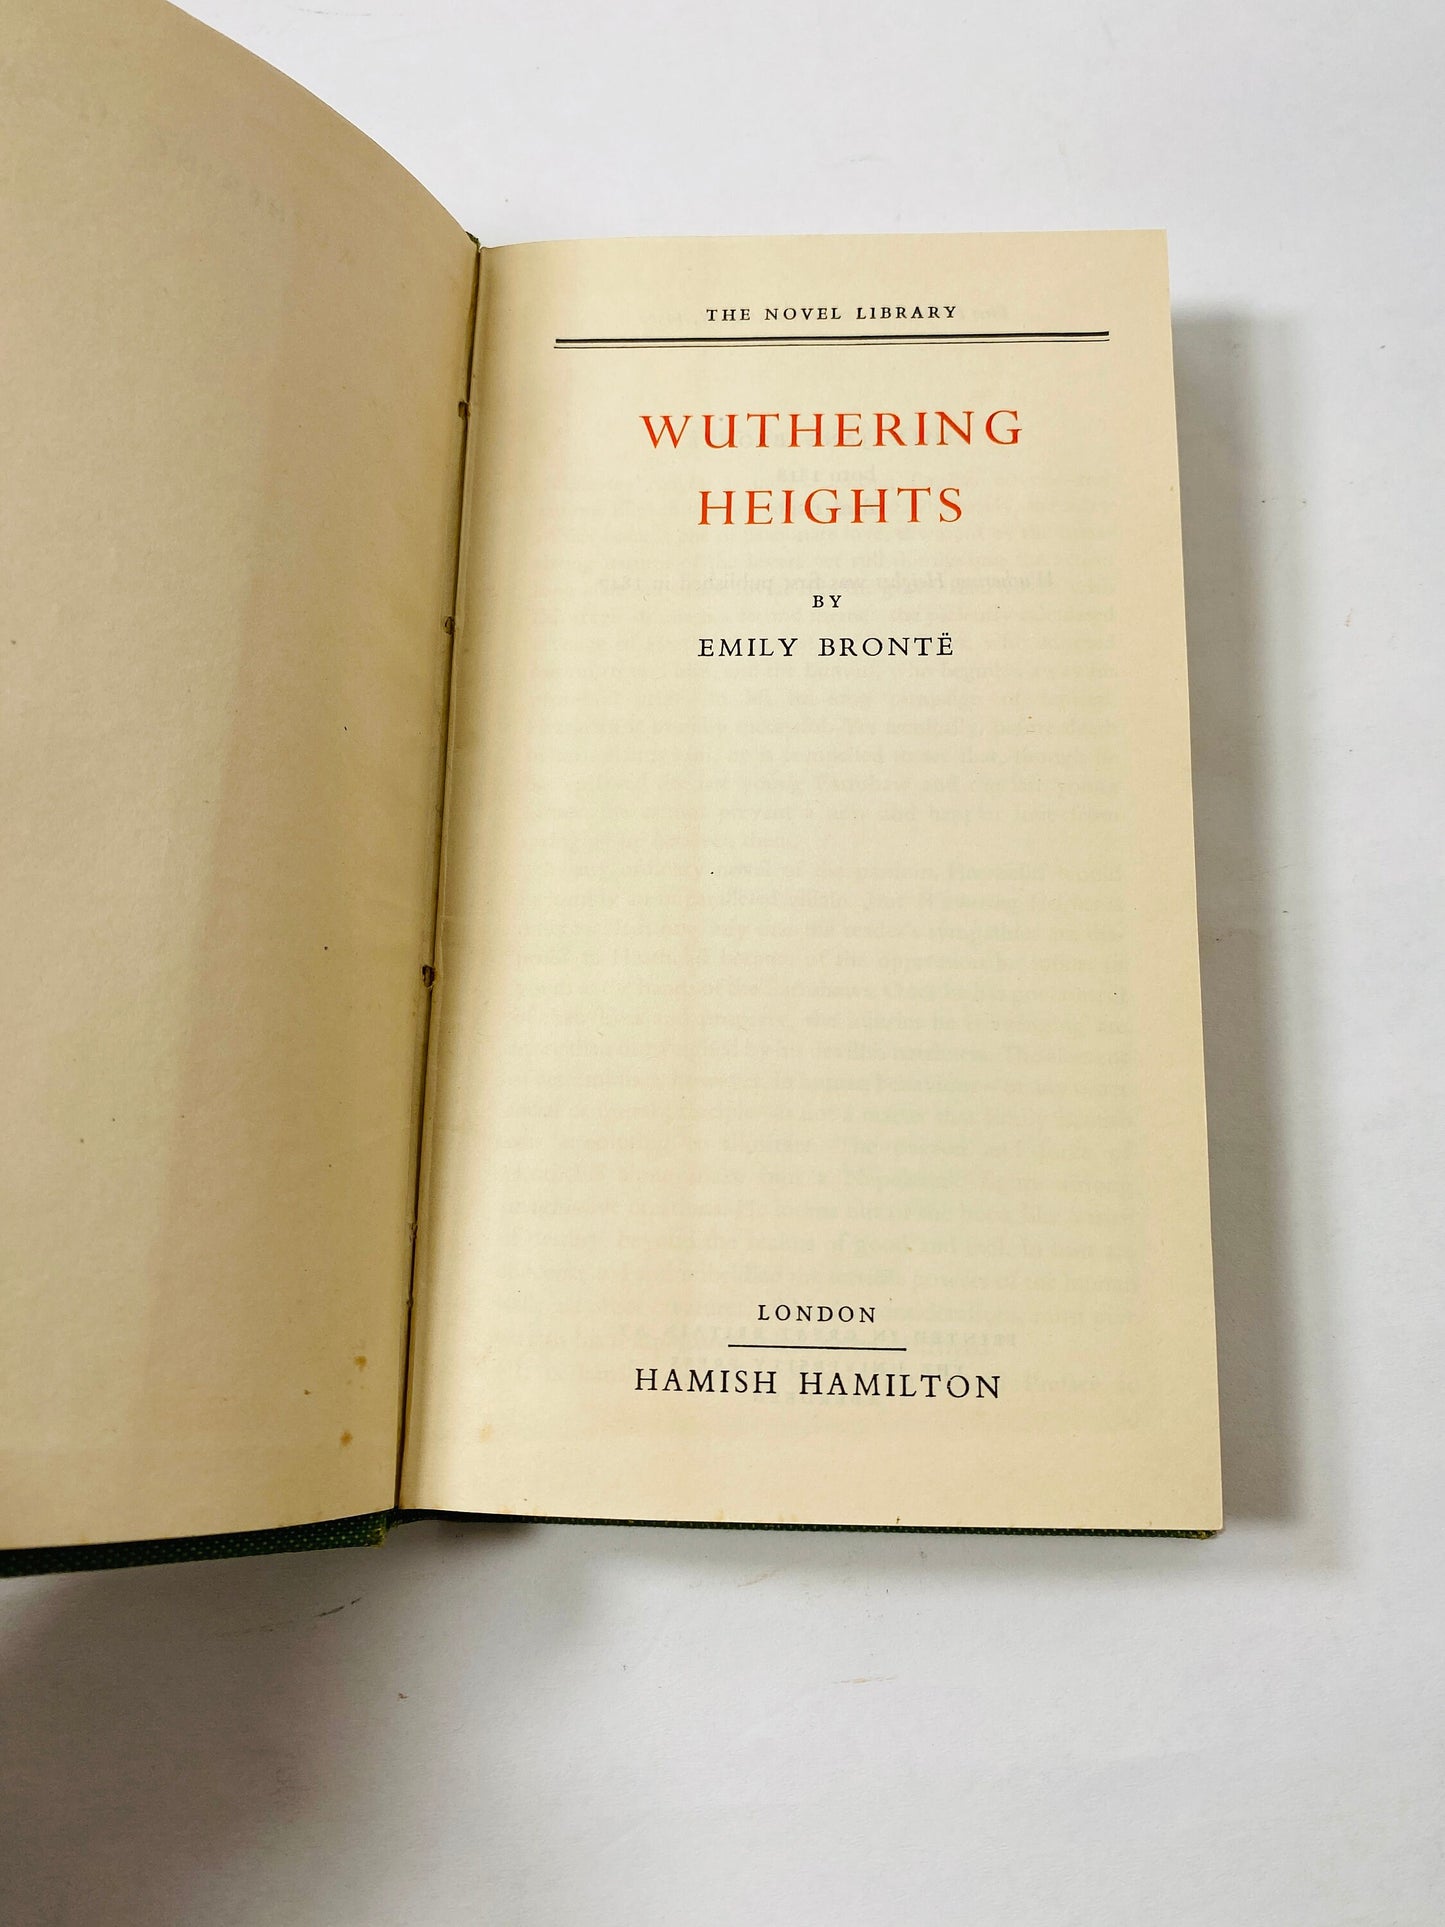 1950 Wuthering Heights by Emily Bronte Beautiful vintage book, London printing Day Fantastic love story and gift. Embossed green home decor